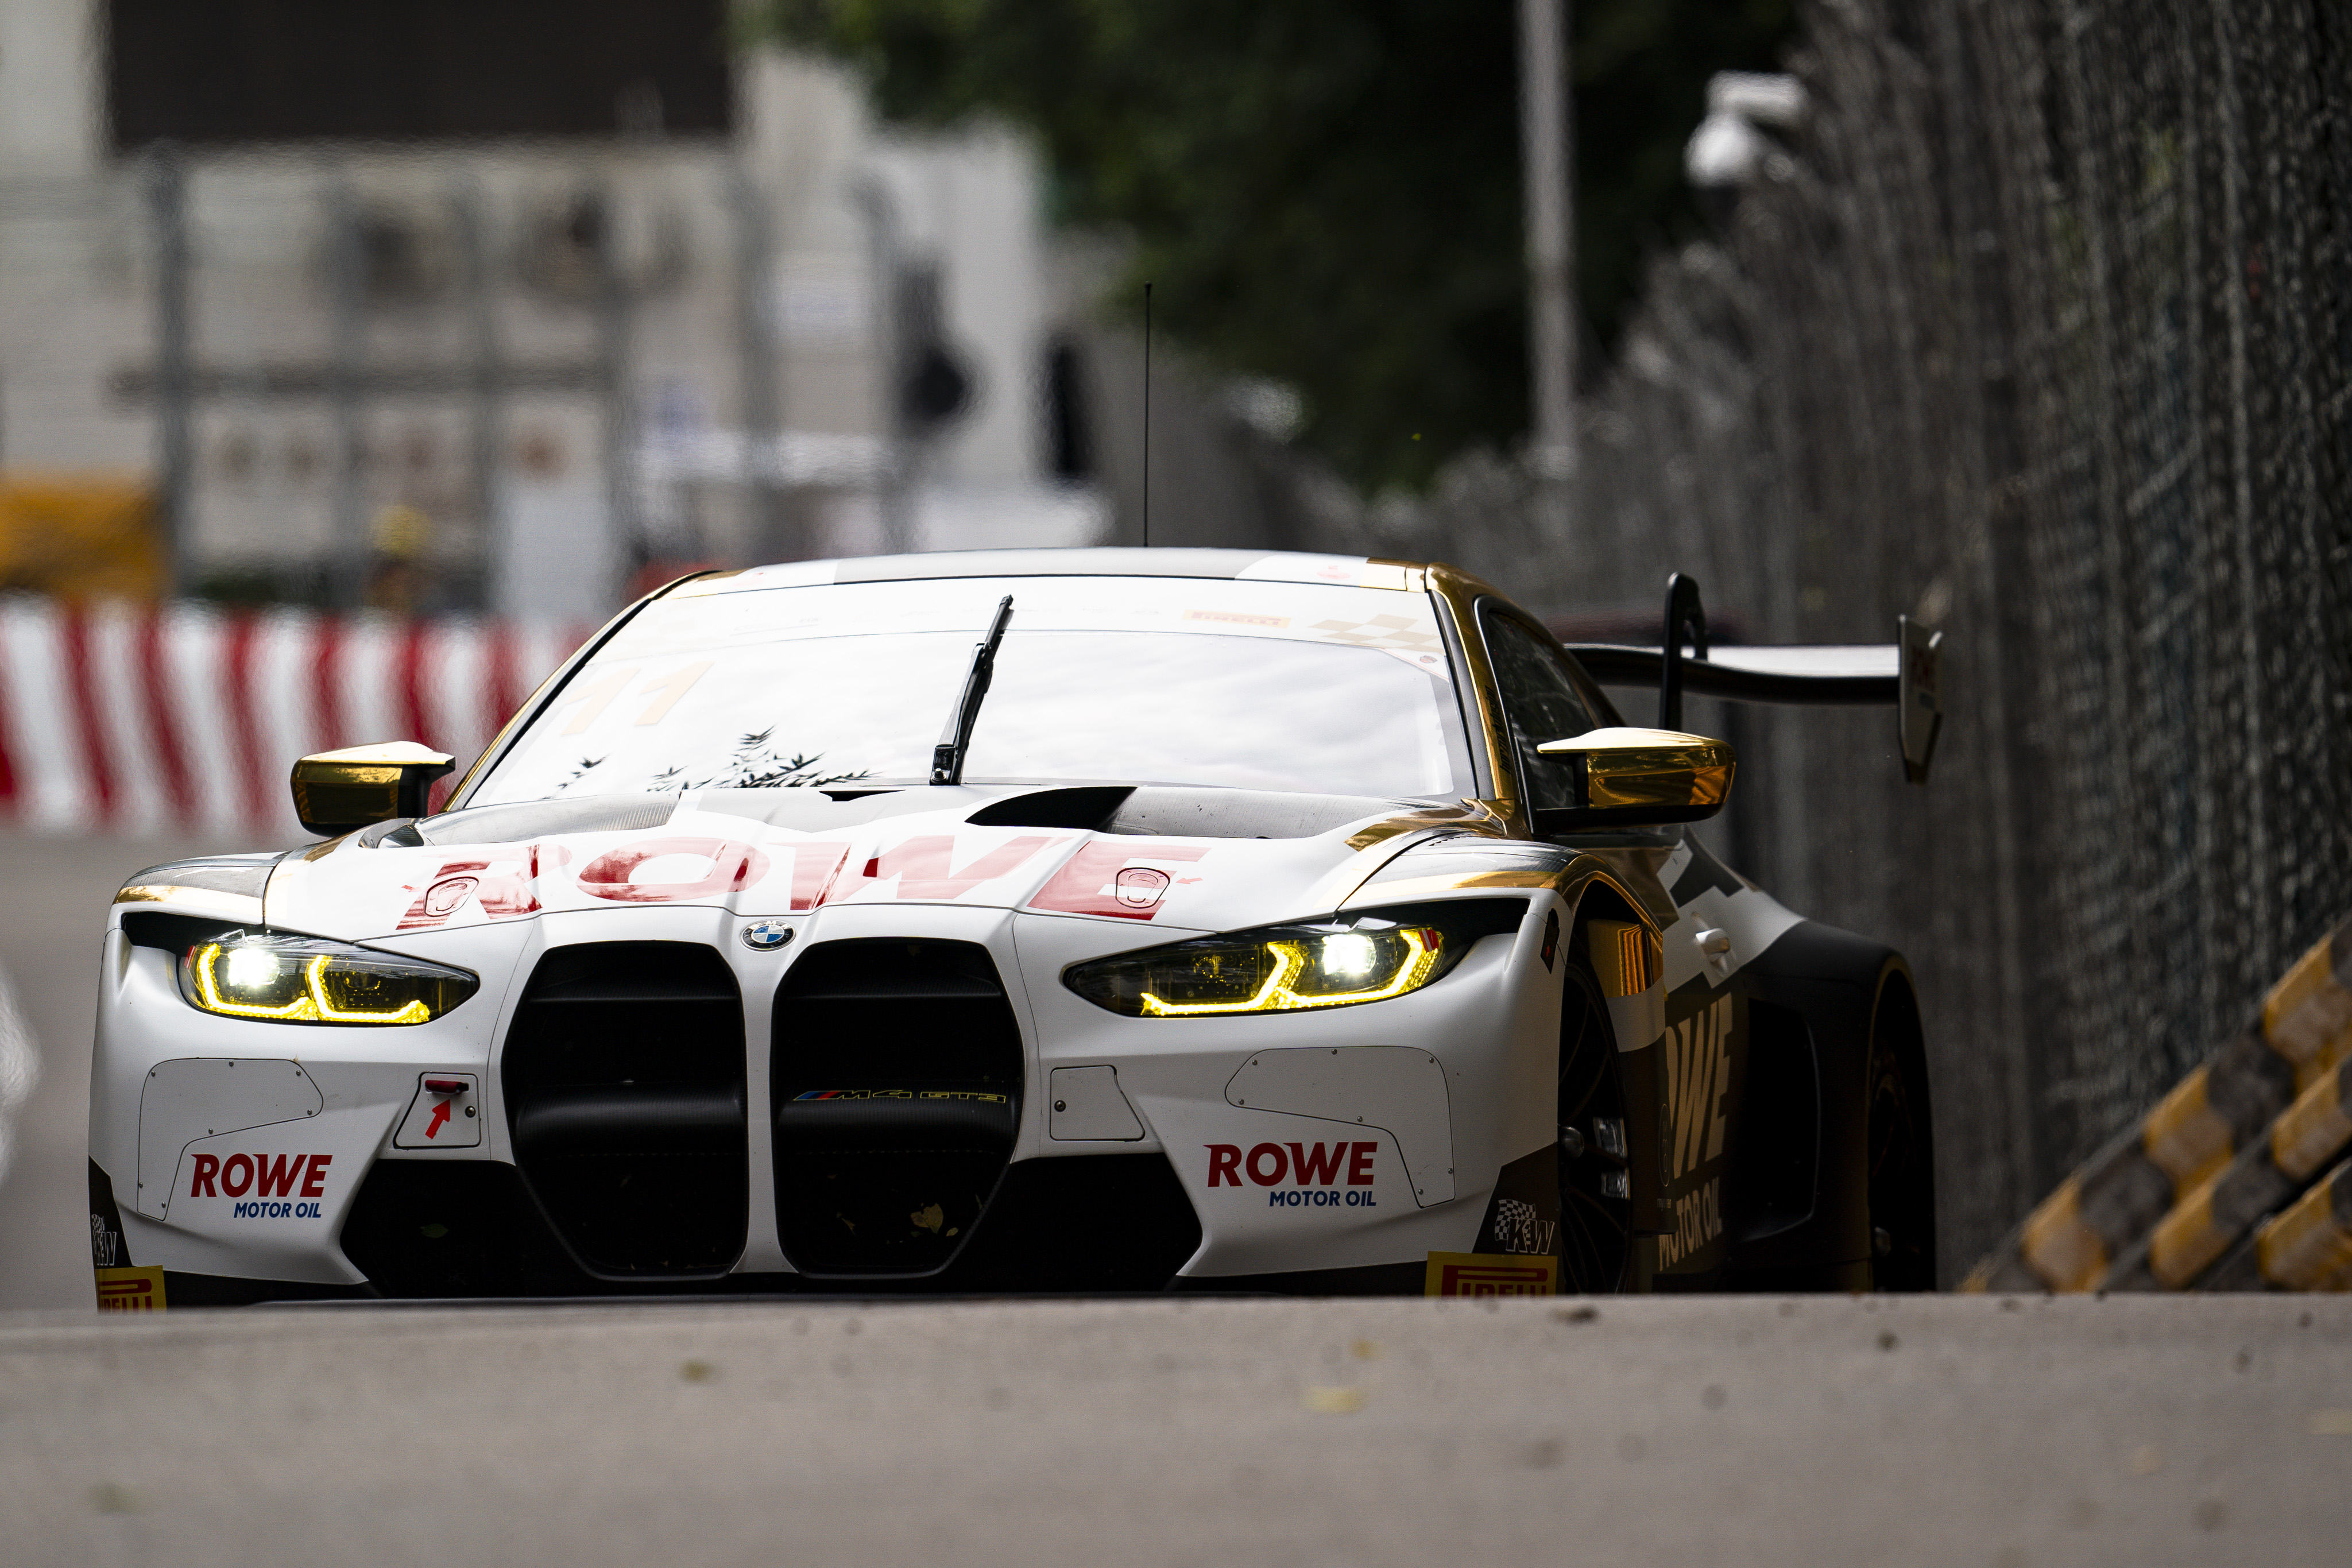 FIA GT World Cup: Augusto Farfus takes the BMW M4 GT3 to the podium on the streets of Macau.